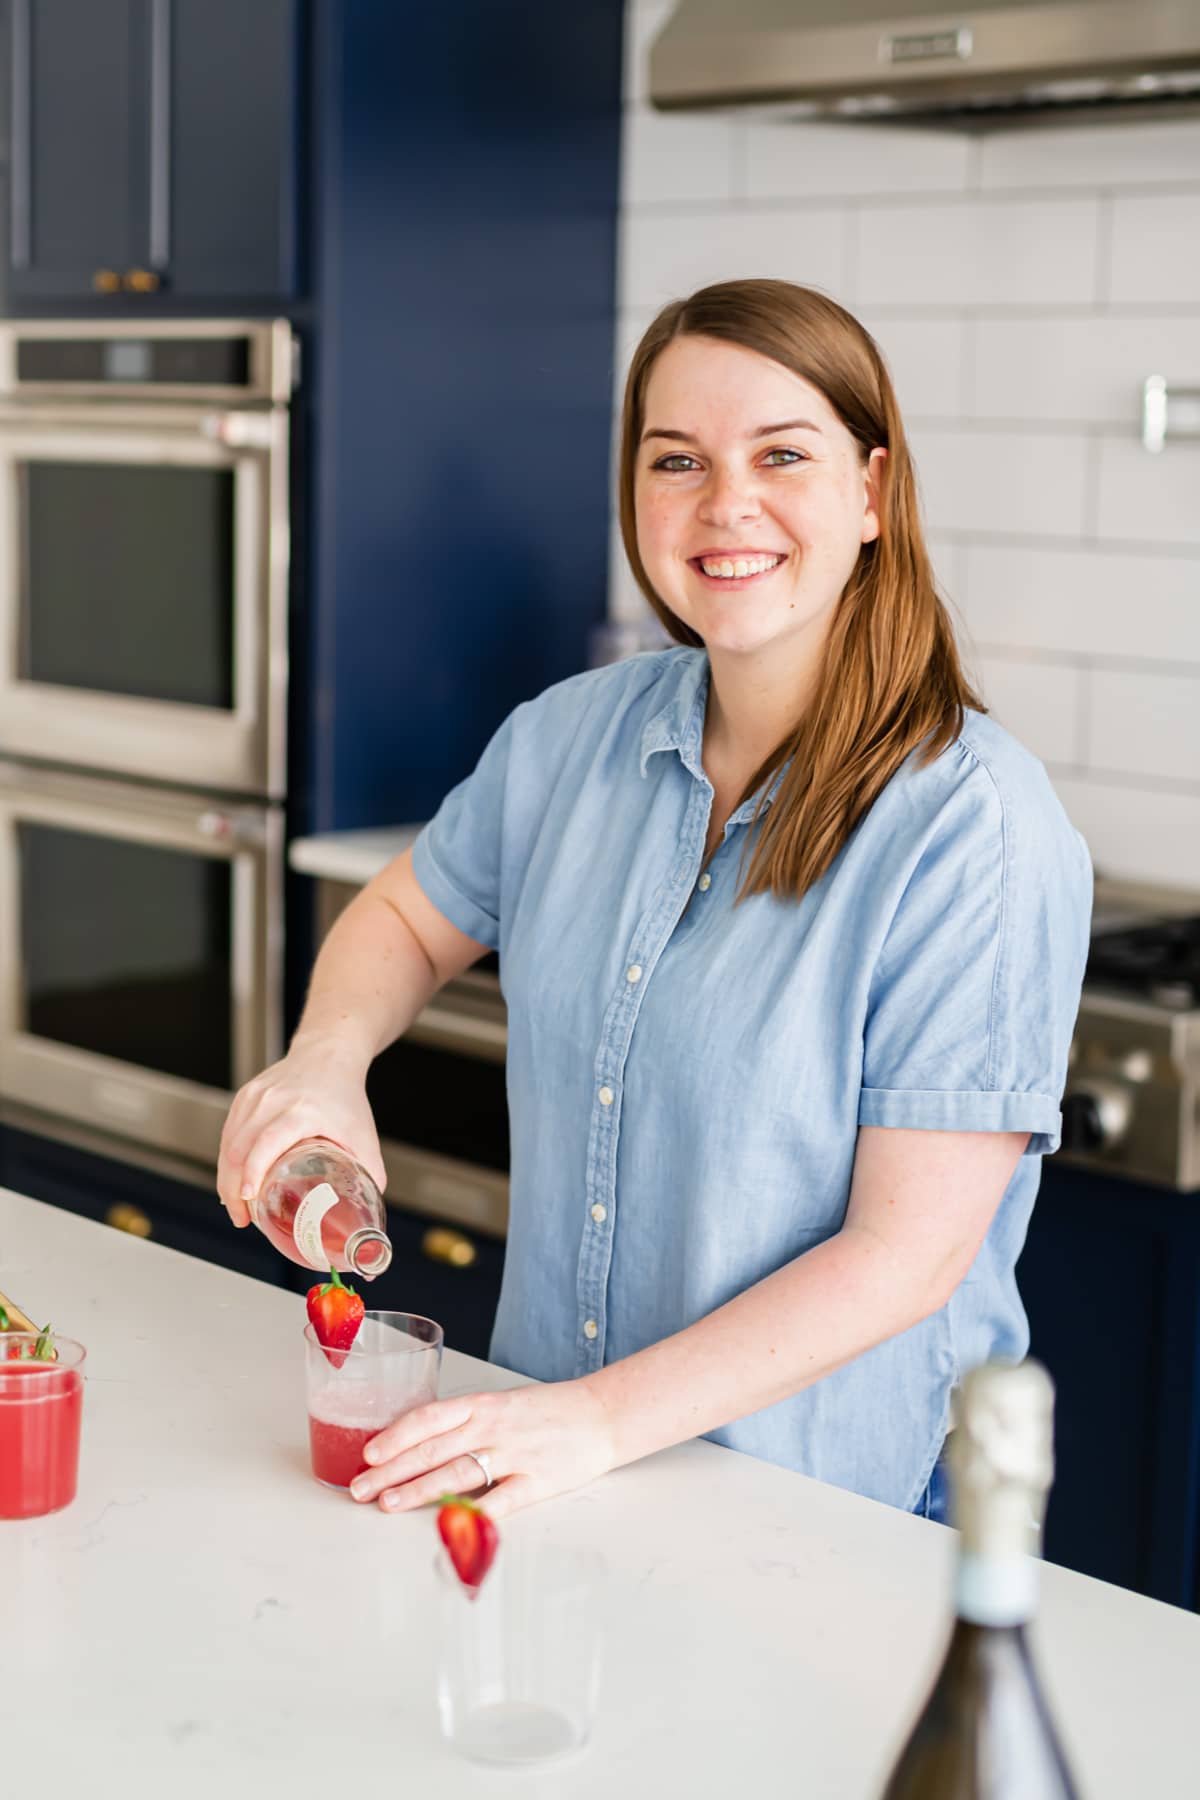 A woman in a blue shirt pouring strawberry cocktail into a glass garnished with a fresh strawberry.